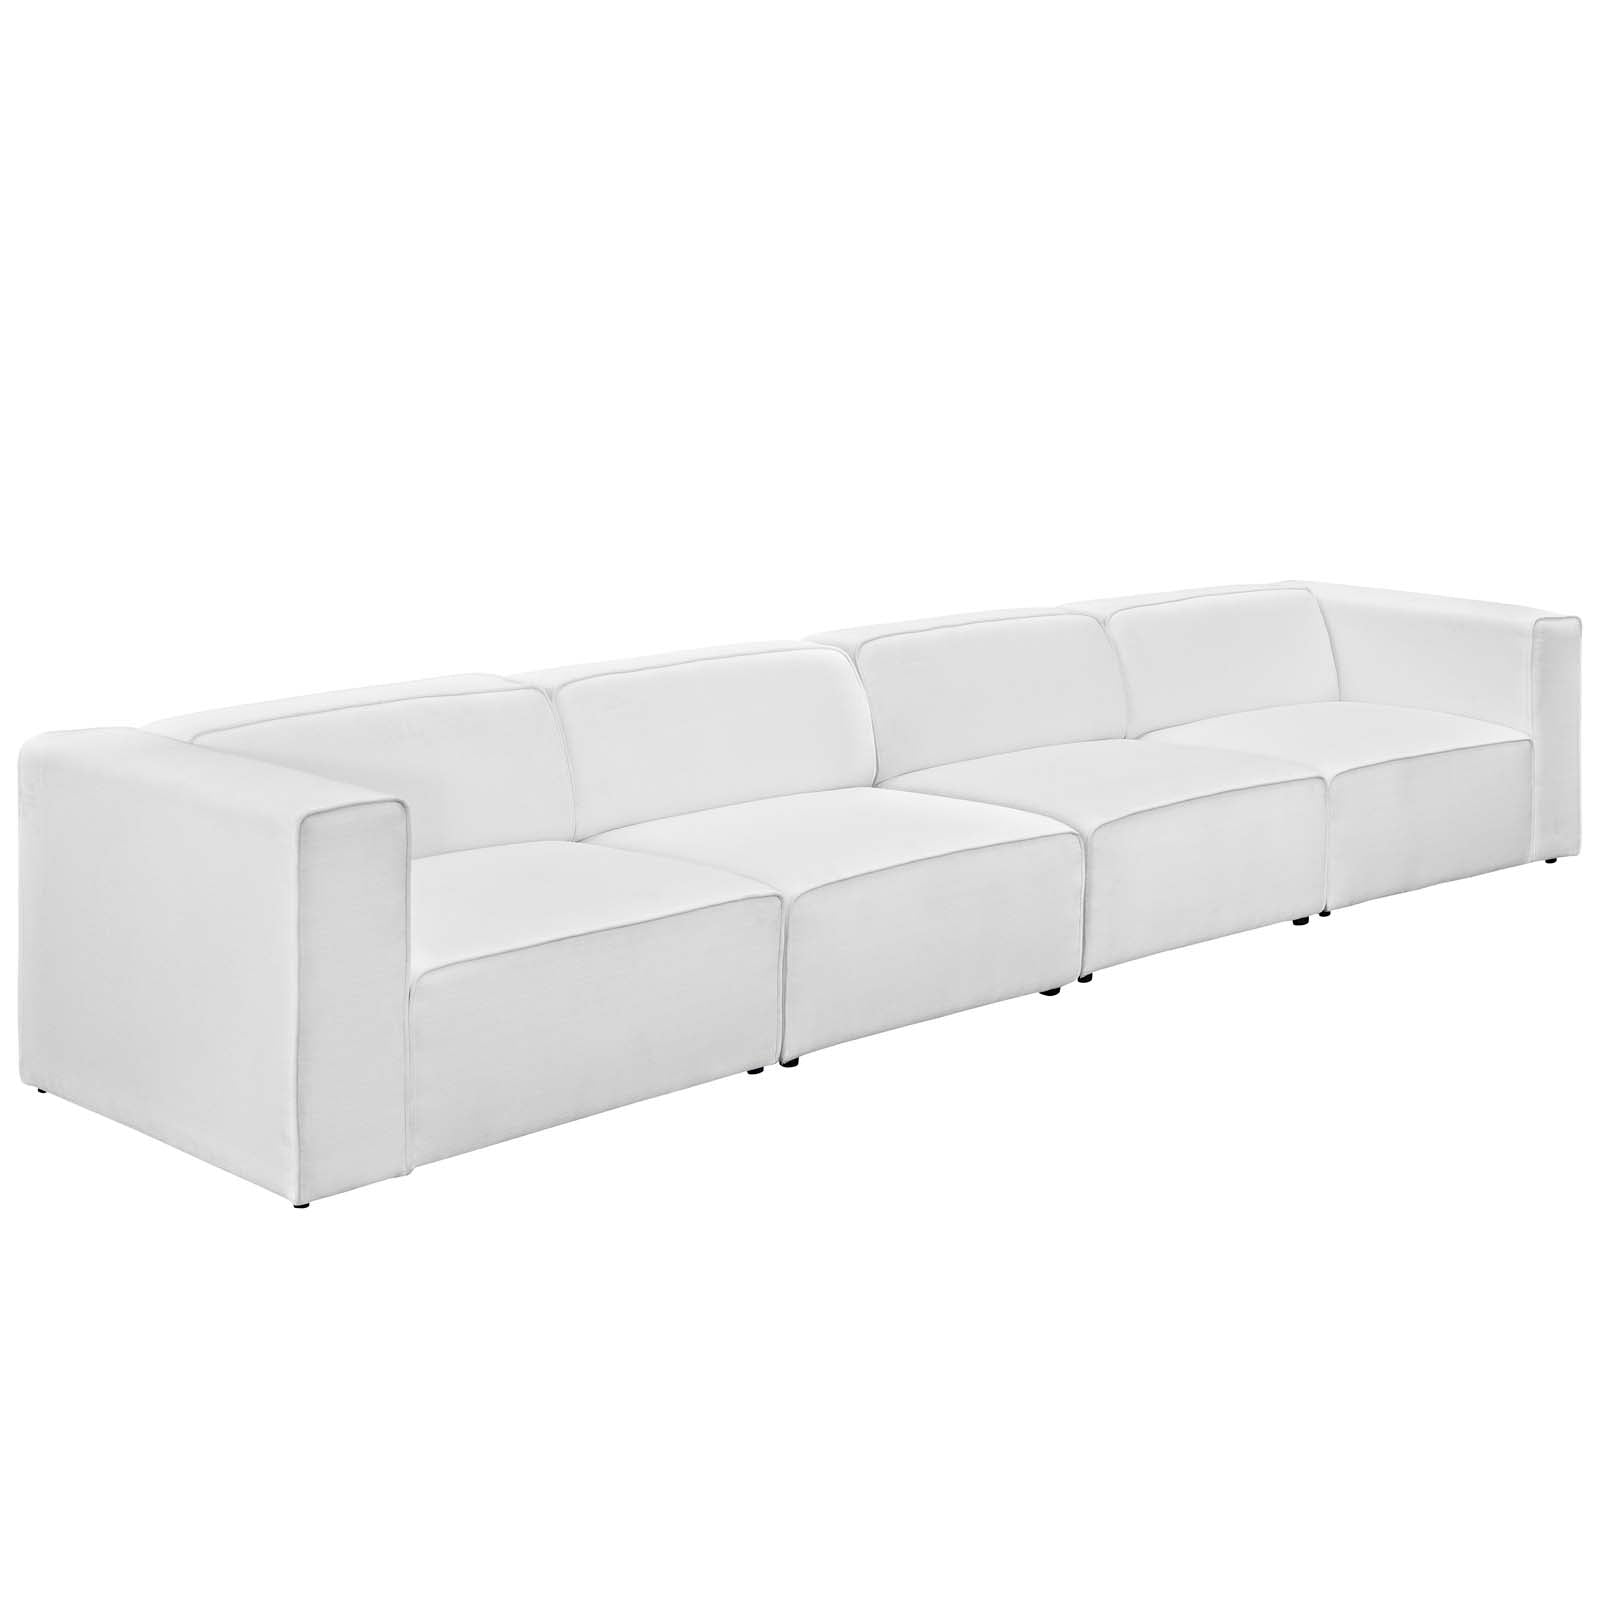 Modway Sofas & Couches - Mingle Upholstered Fabric Sectional Sofa Set White